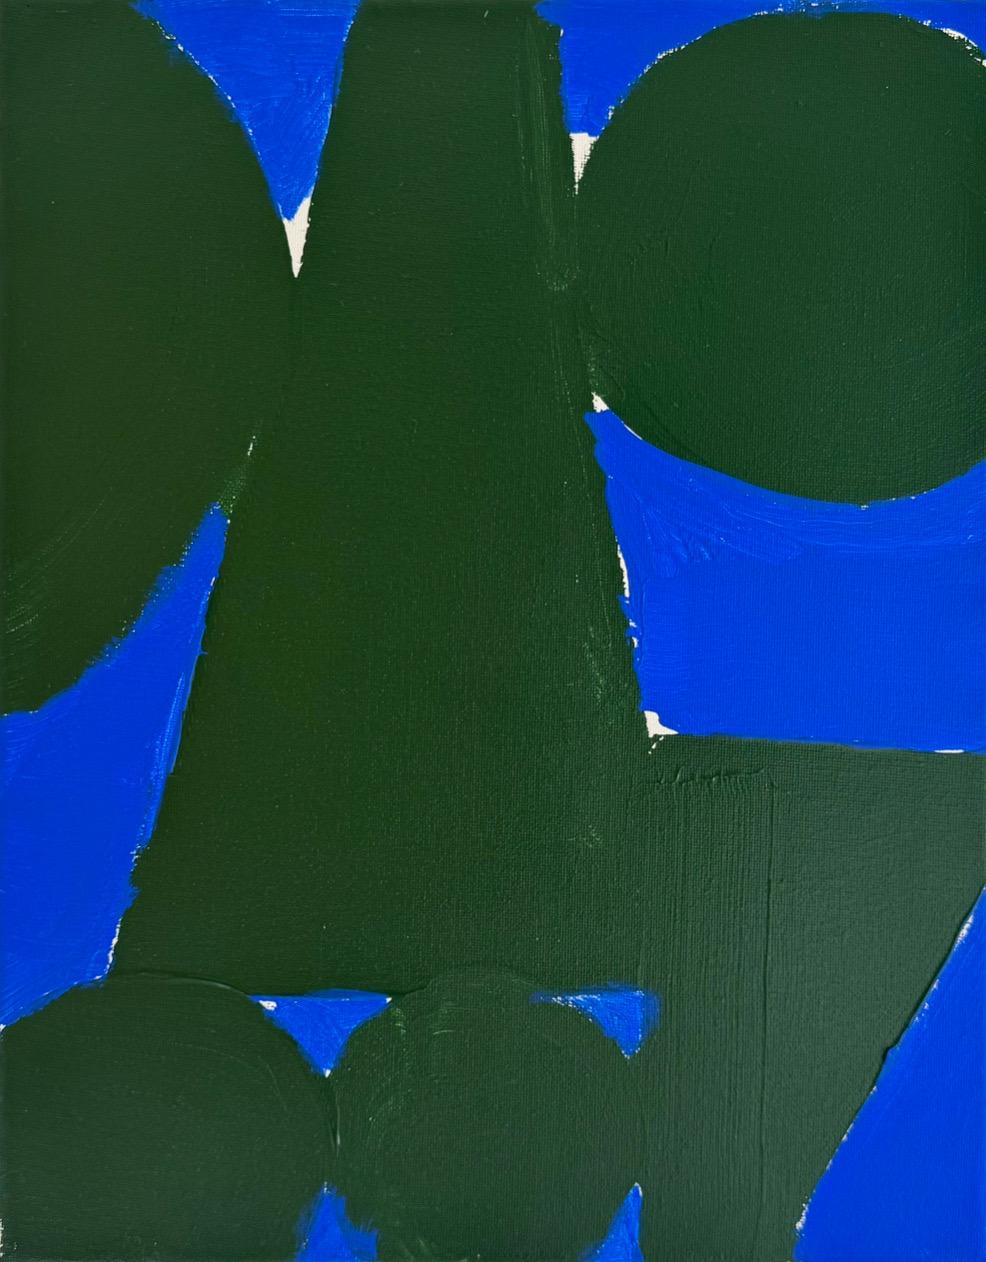 This painting uses simple geometric shapes and color harmony to explore balance and the relationship between positive and negative space. Cool blues and warm green shapes bring a sense of balance and harmony, bits of white create accent points and